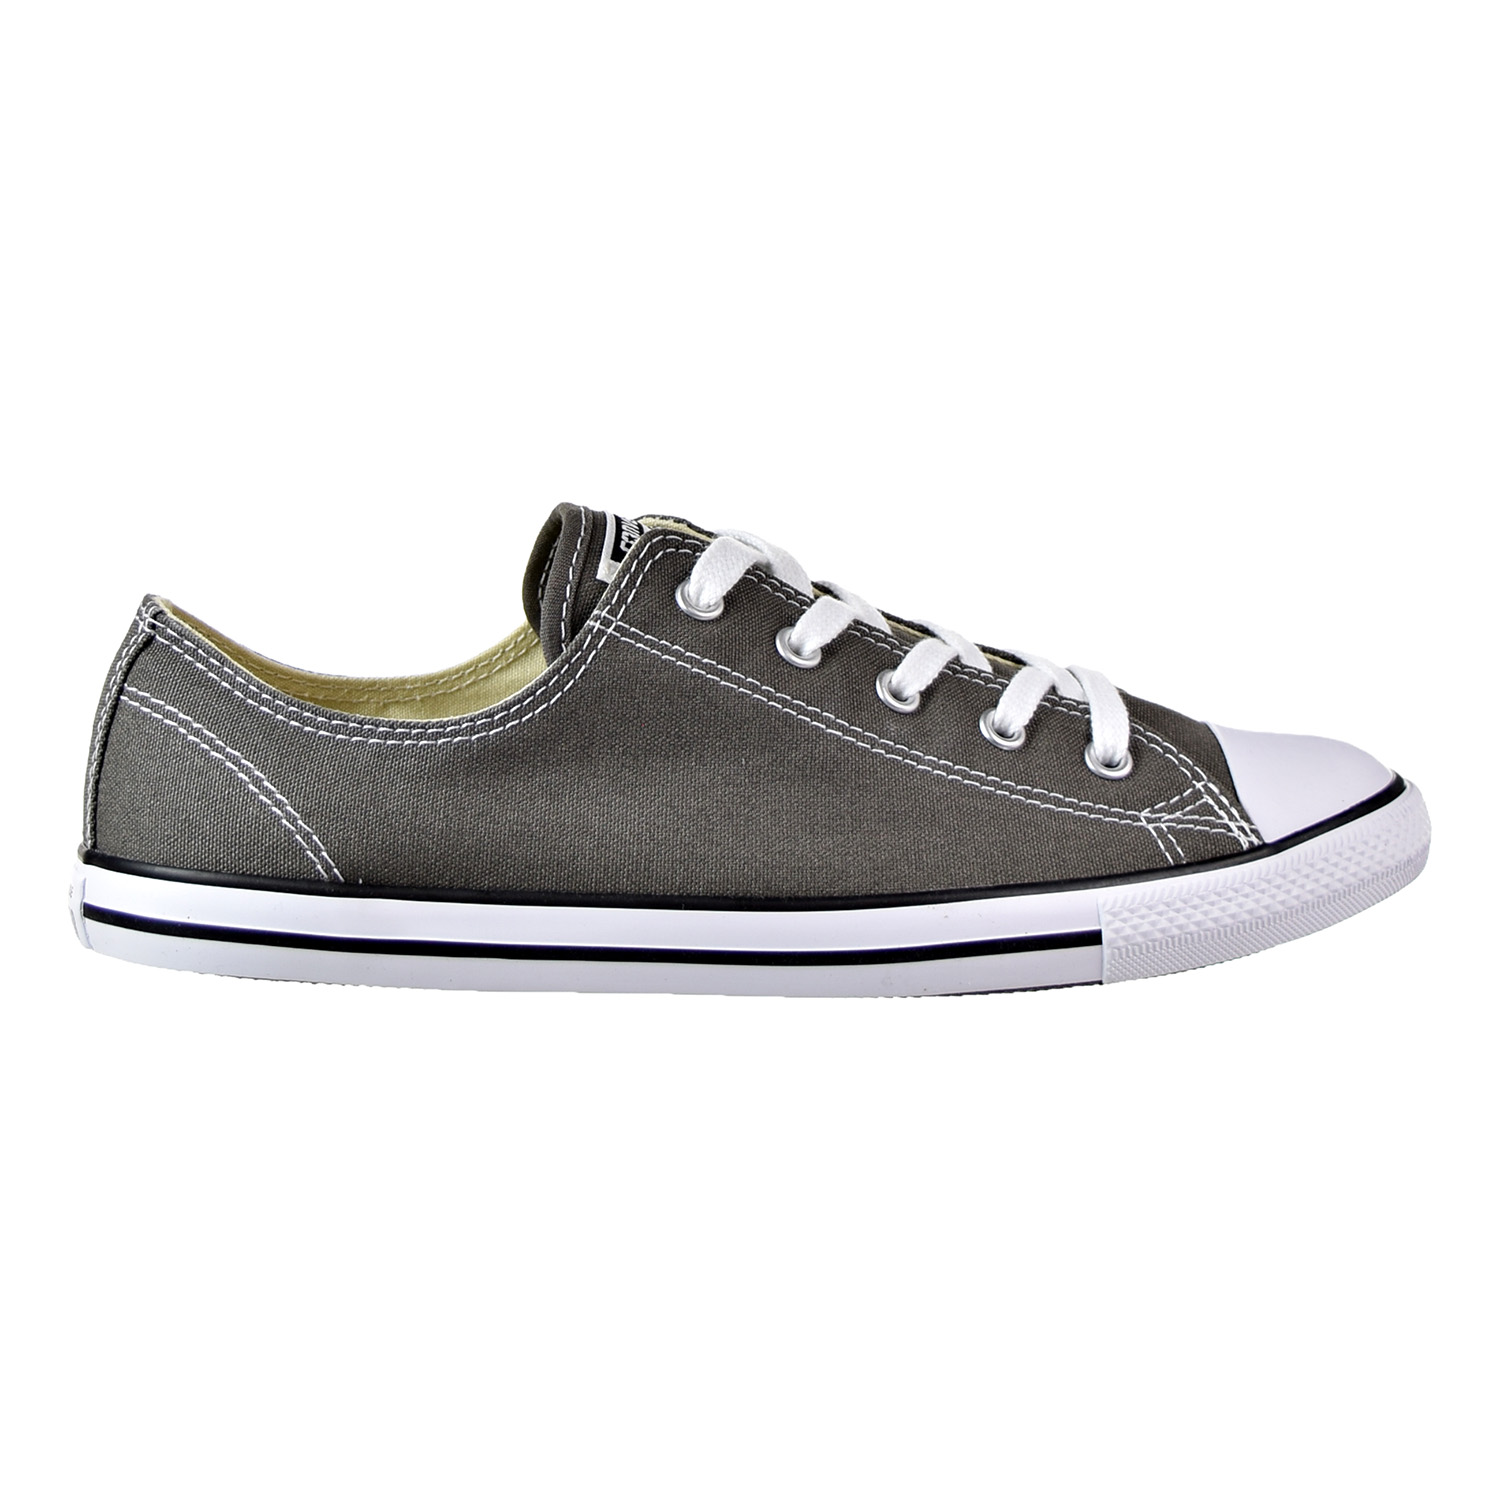 converse sneakers chuck taylor all star dainty ox